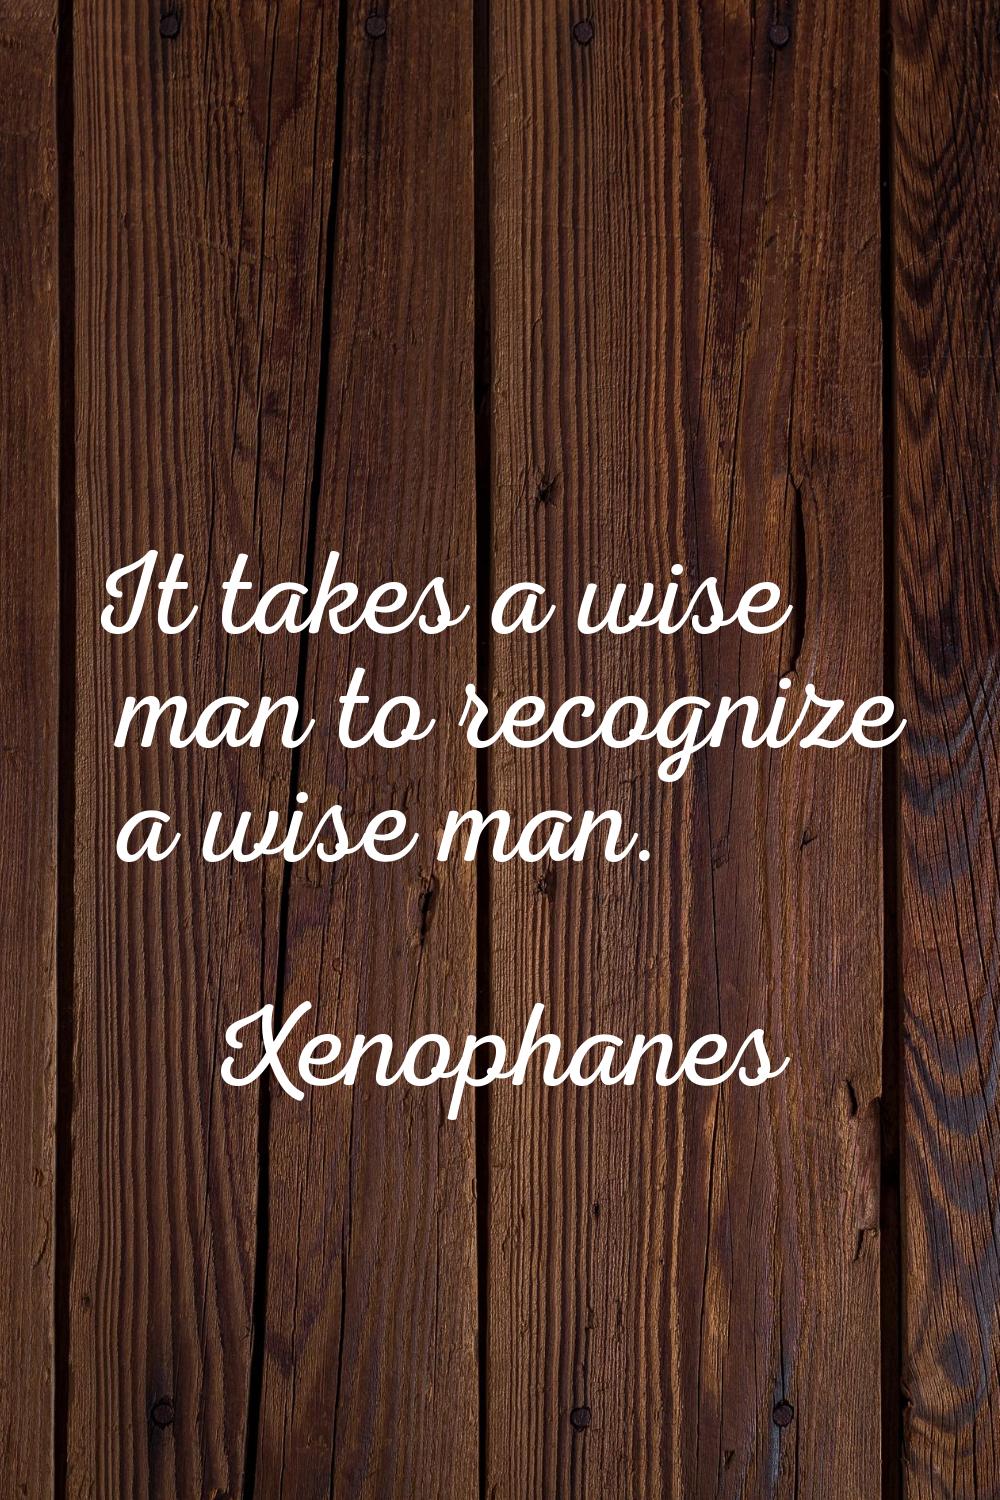 It takes a wise man to recognize a wise man.